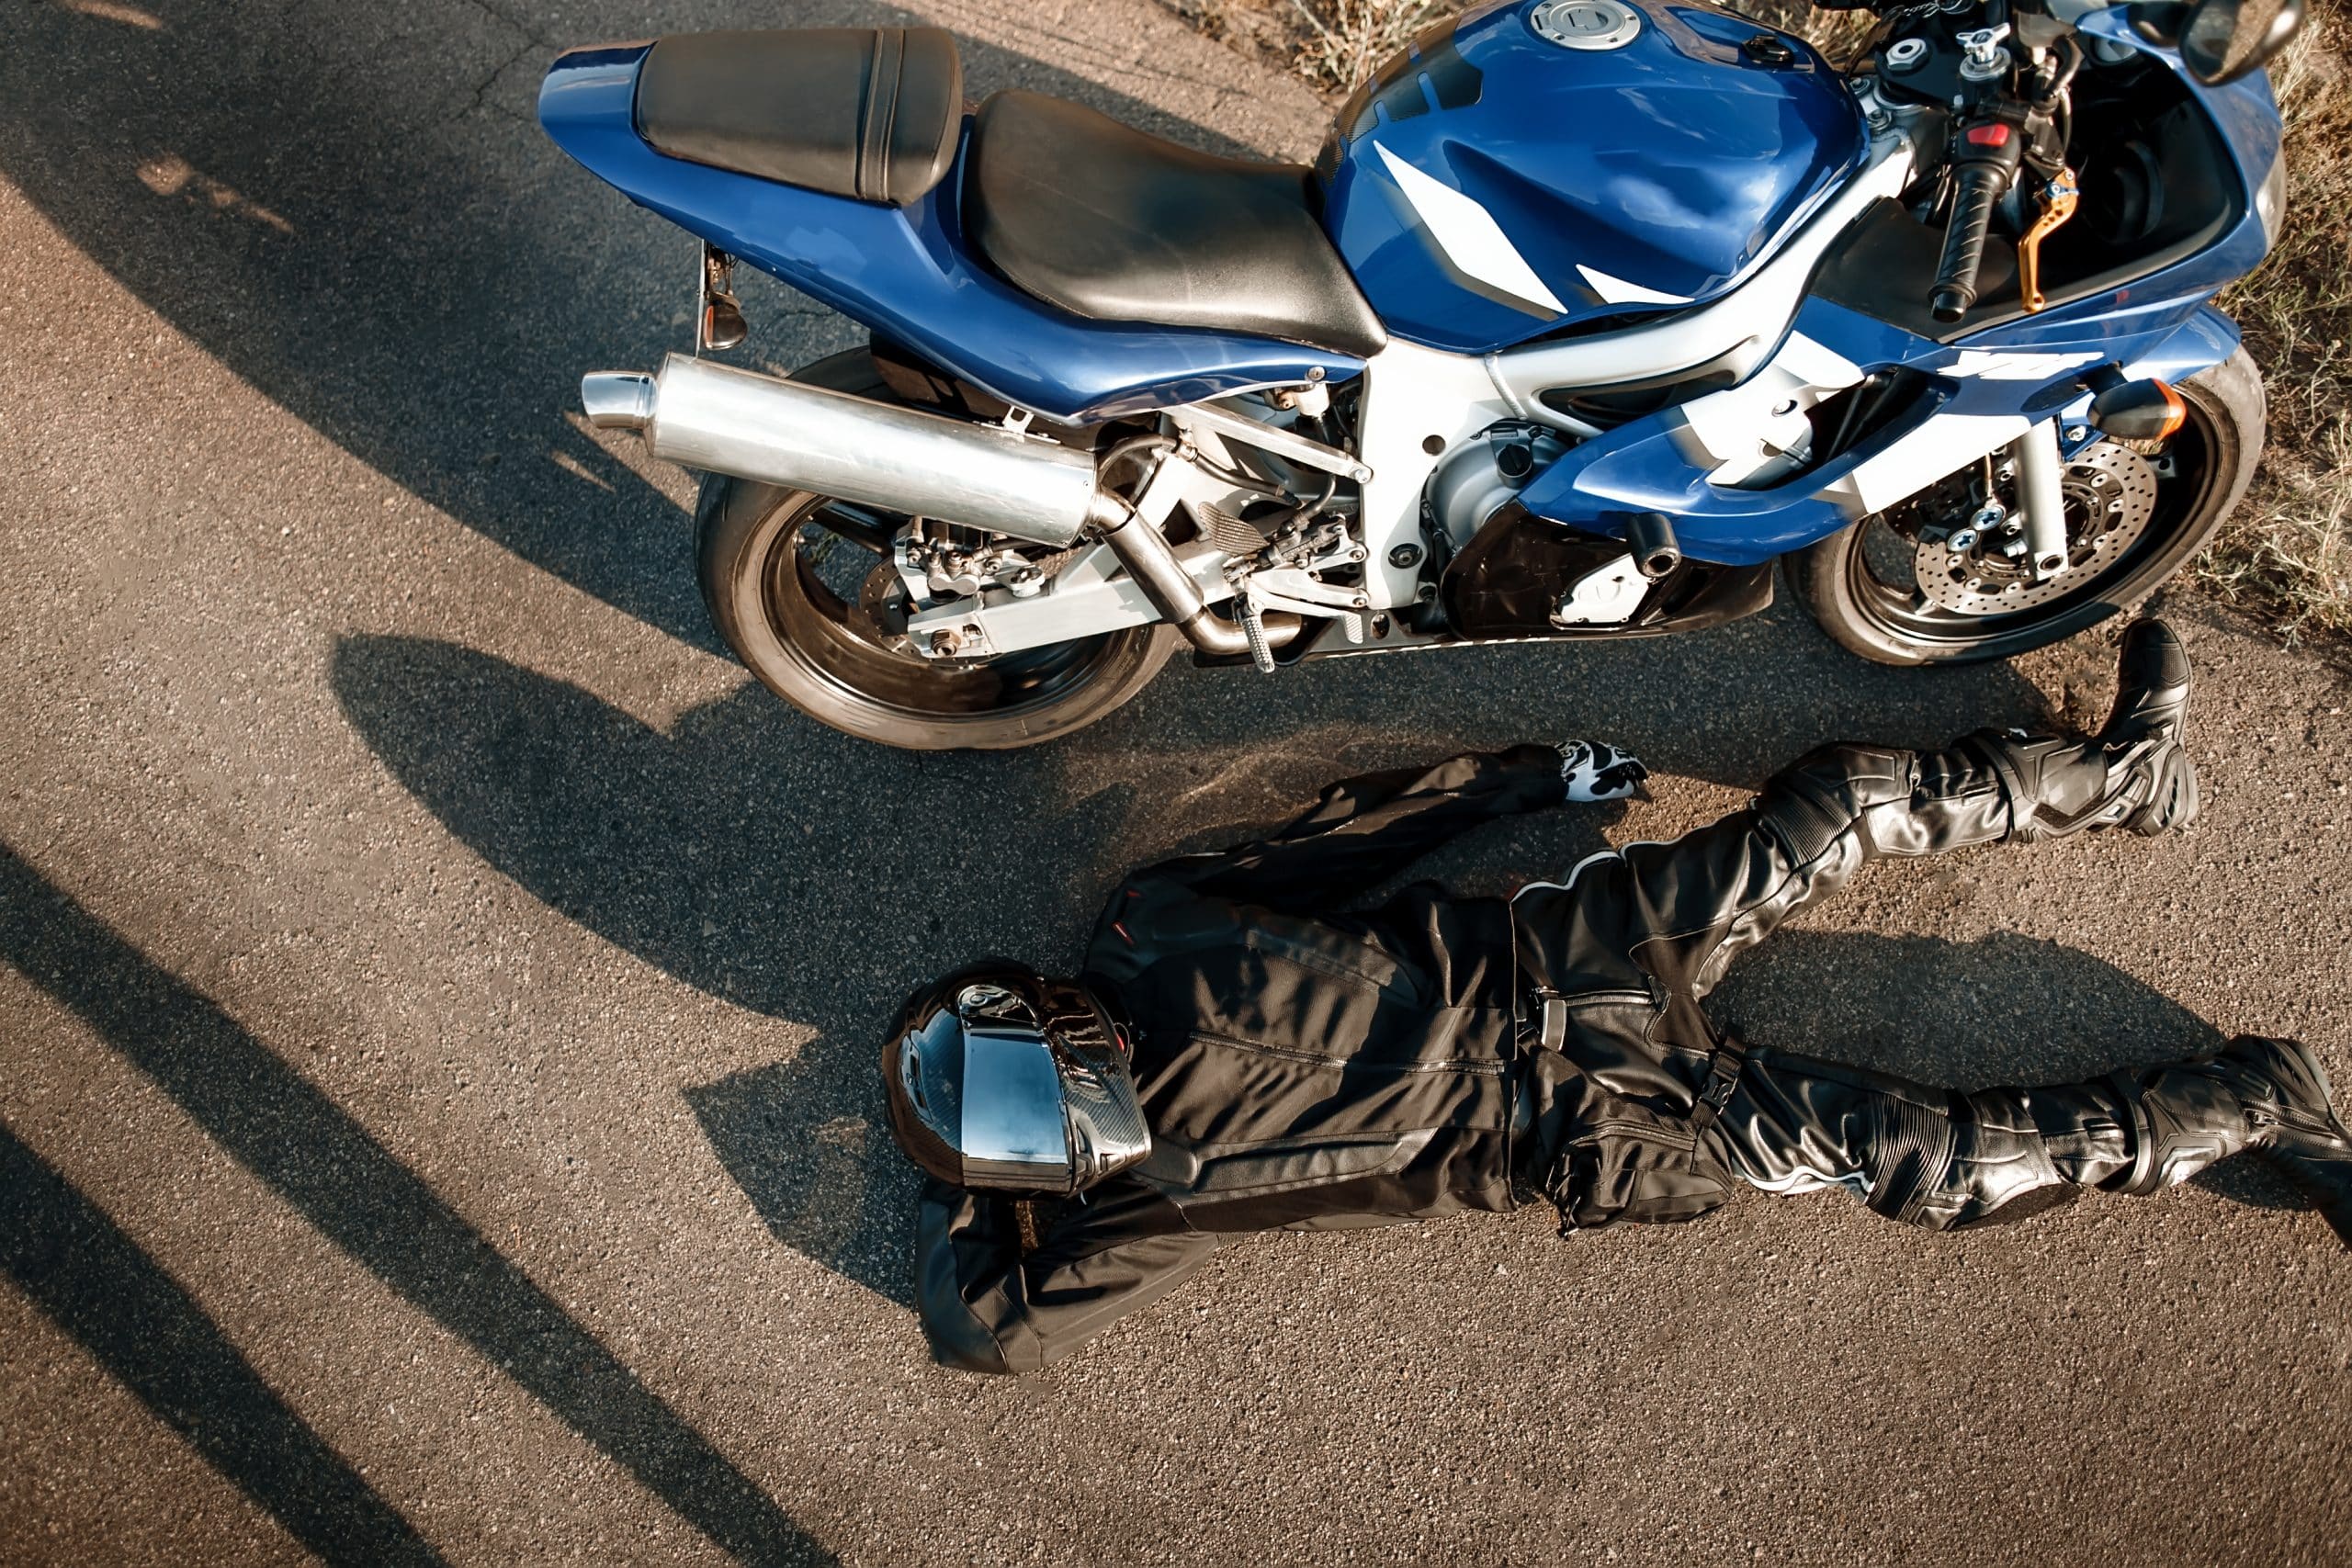 Motorcycle Accident Claims